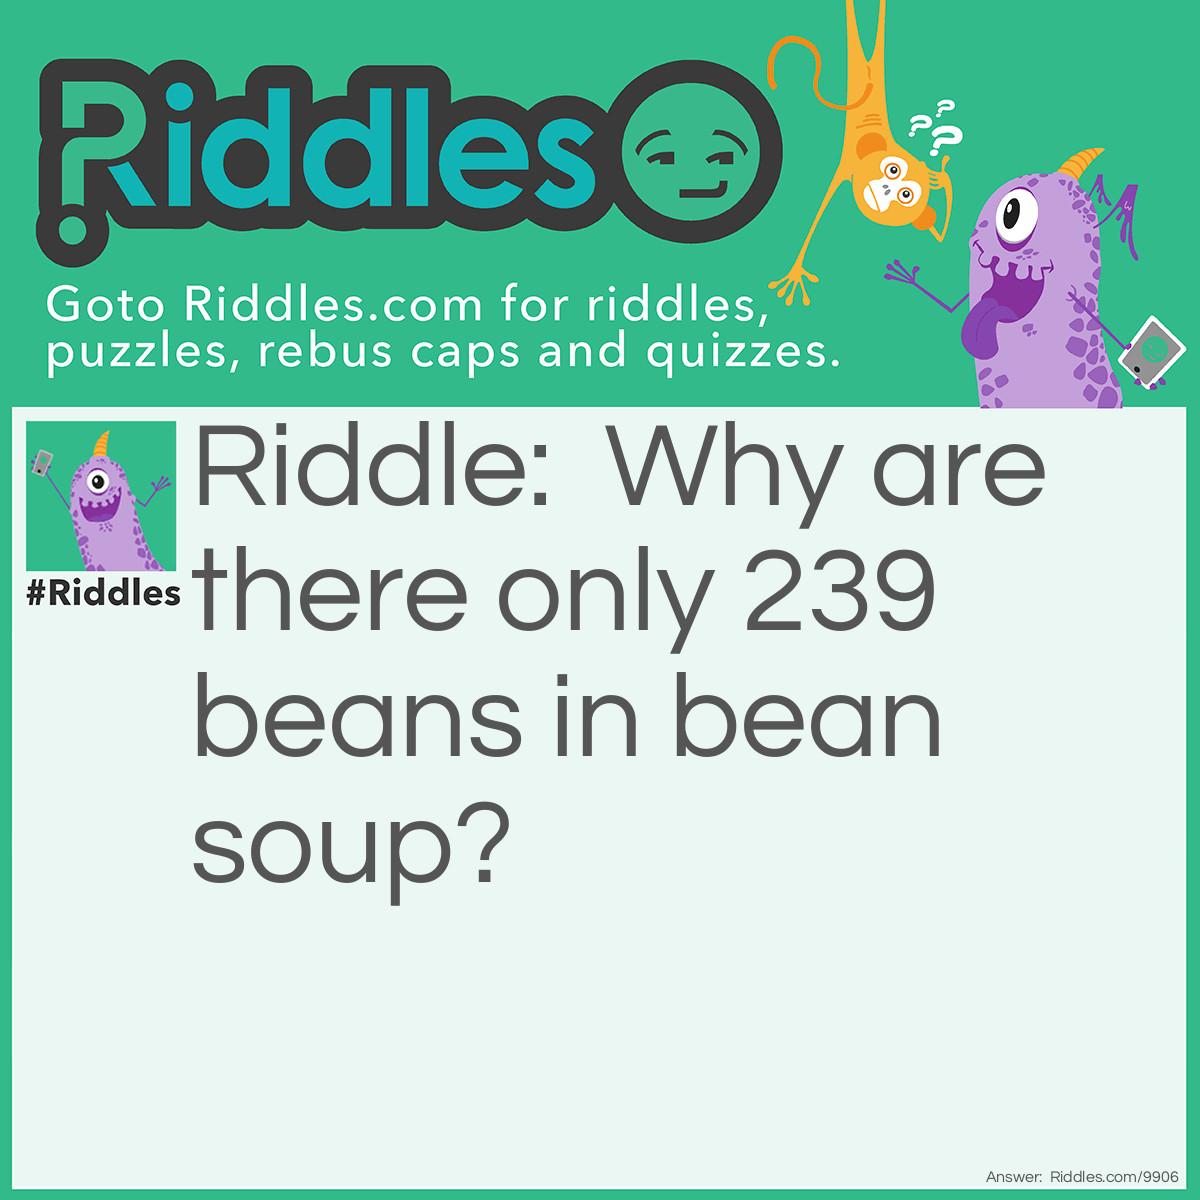 Riddle: Why are there only 239 beans in bean soup? Answer: Because one more will make it too farty! (240)